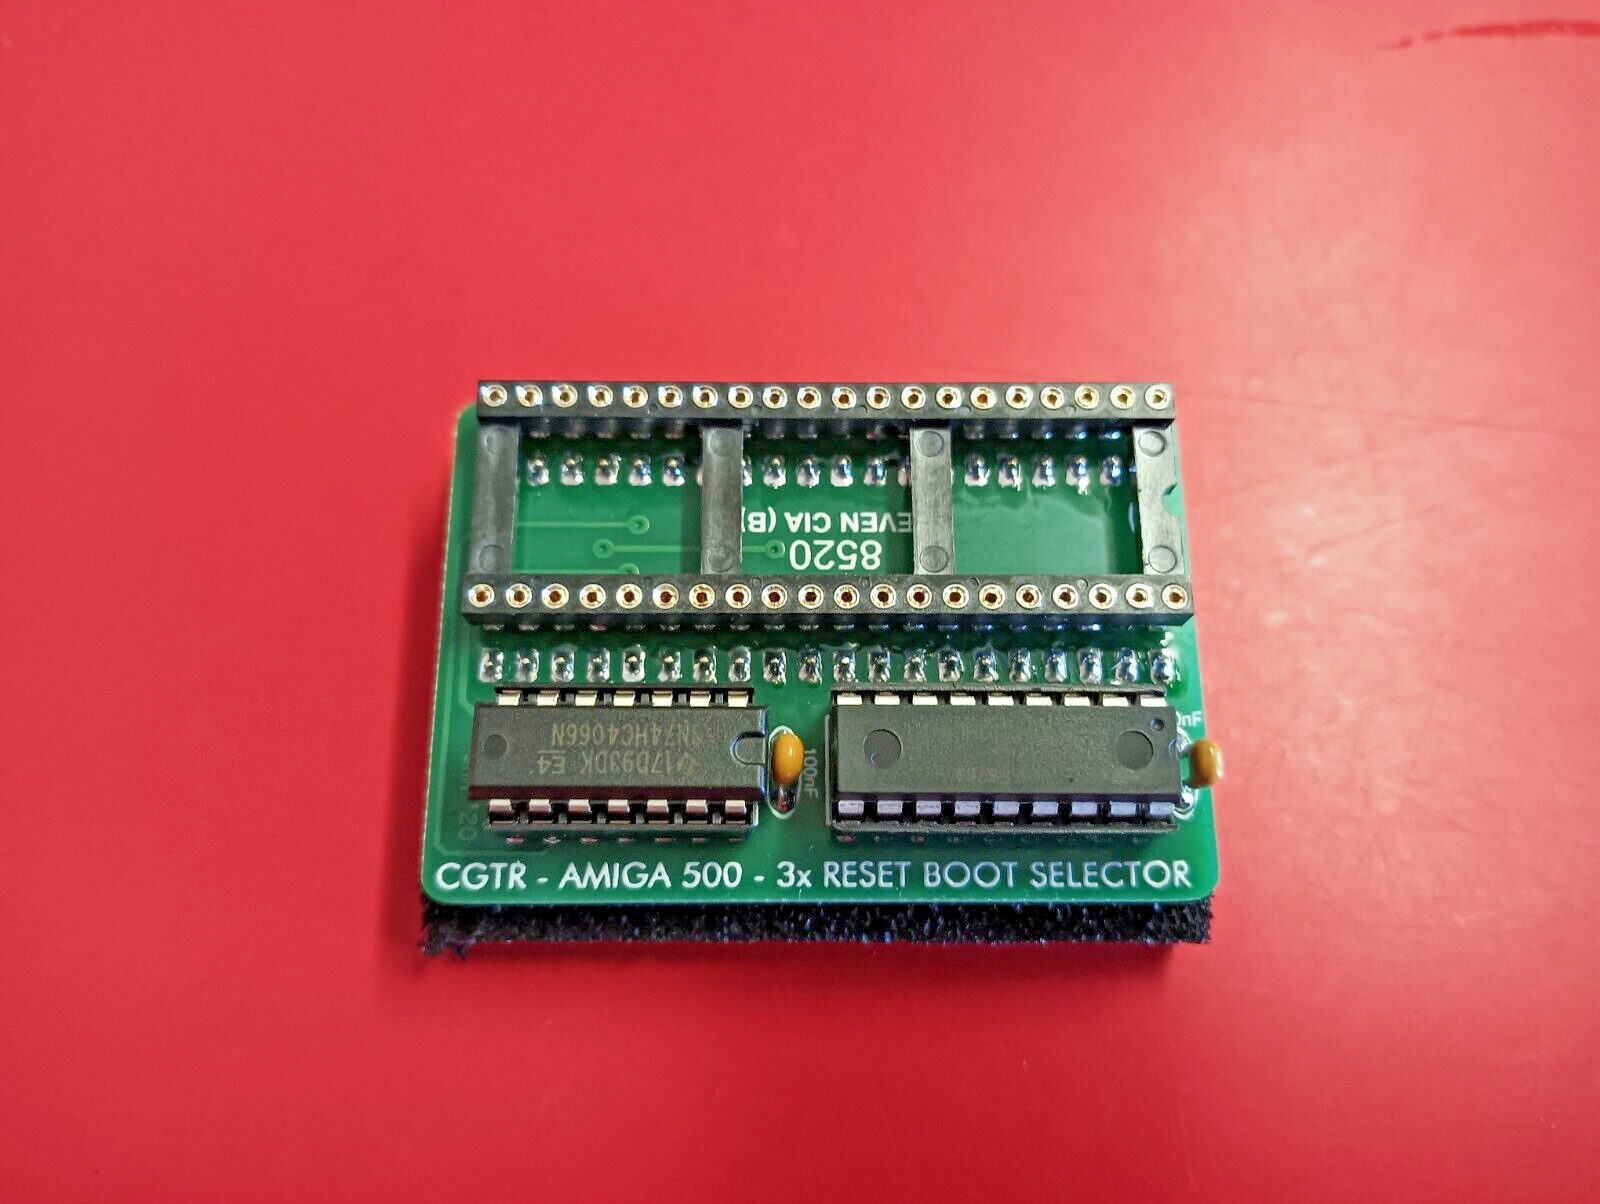 Amiga 500 switchless DF0/DF1 boot selector module Boot from external drive/gotek